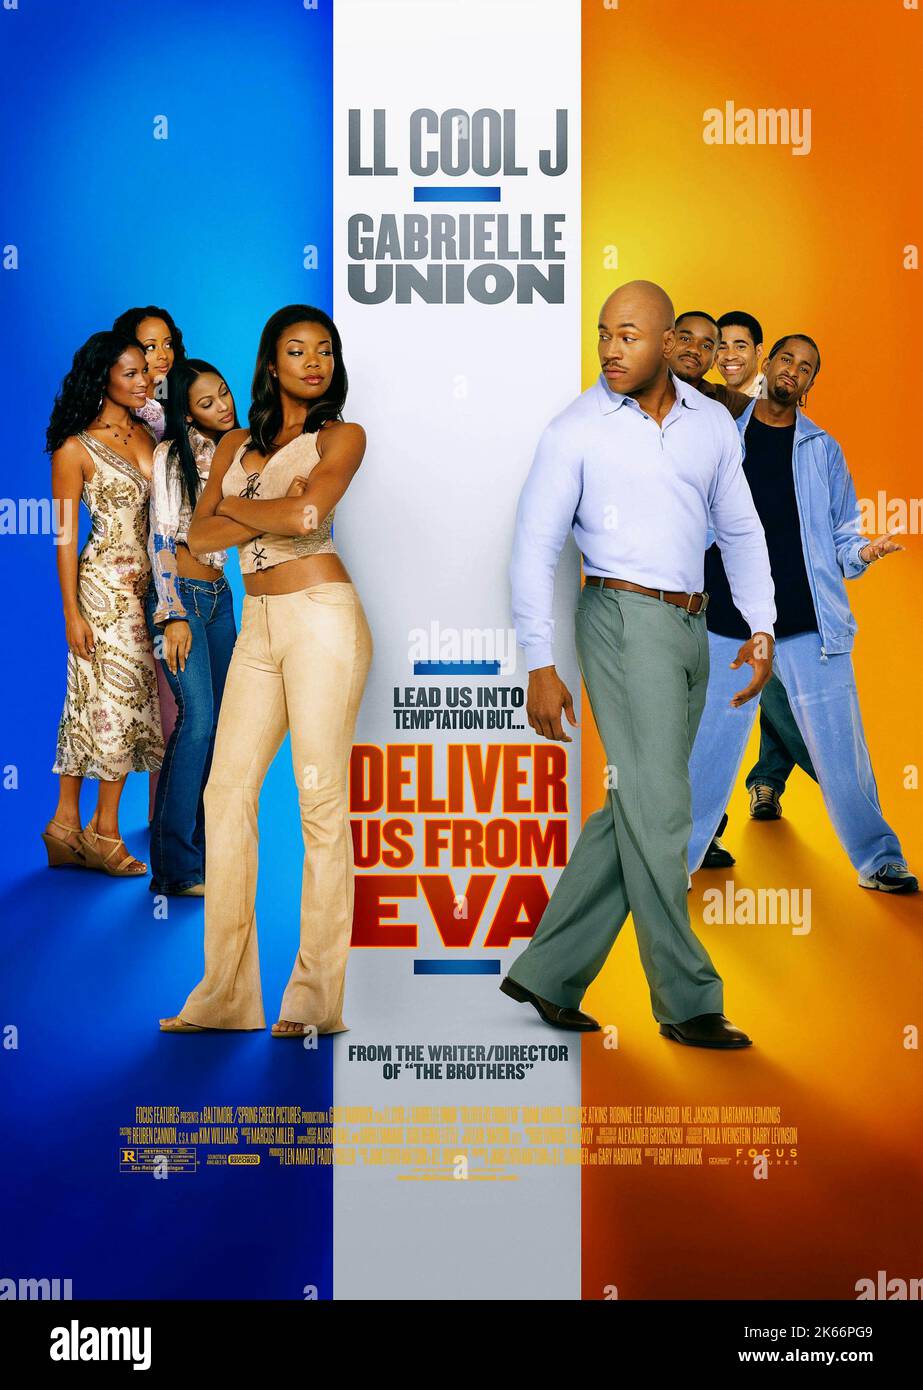 GABRIELLE UNION, LL COOL J, DELIVER US FROM EVA, 2003 Stock Photo